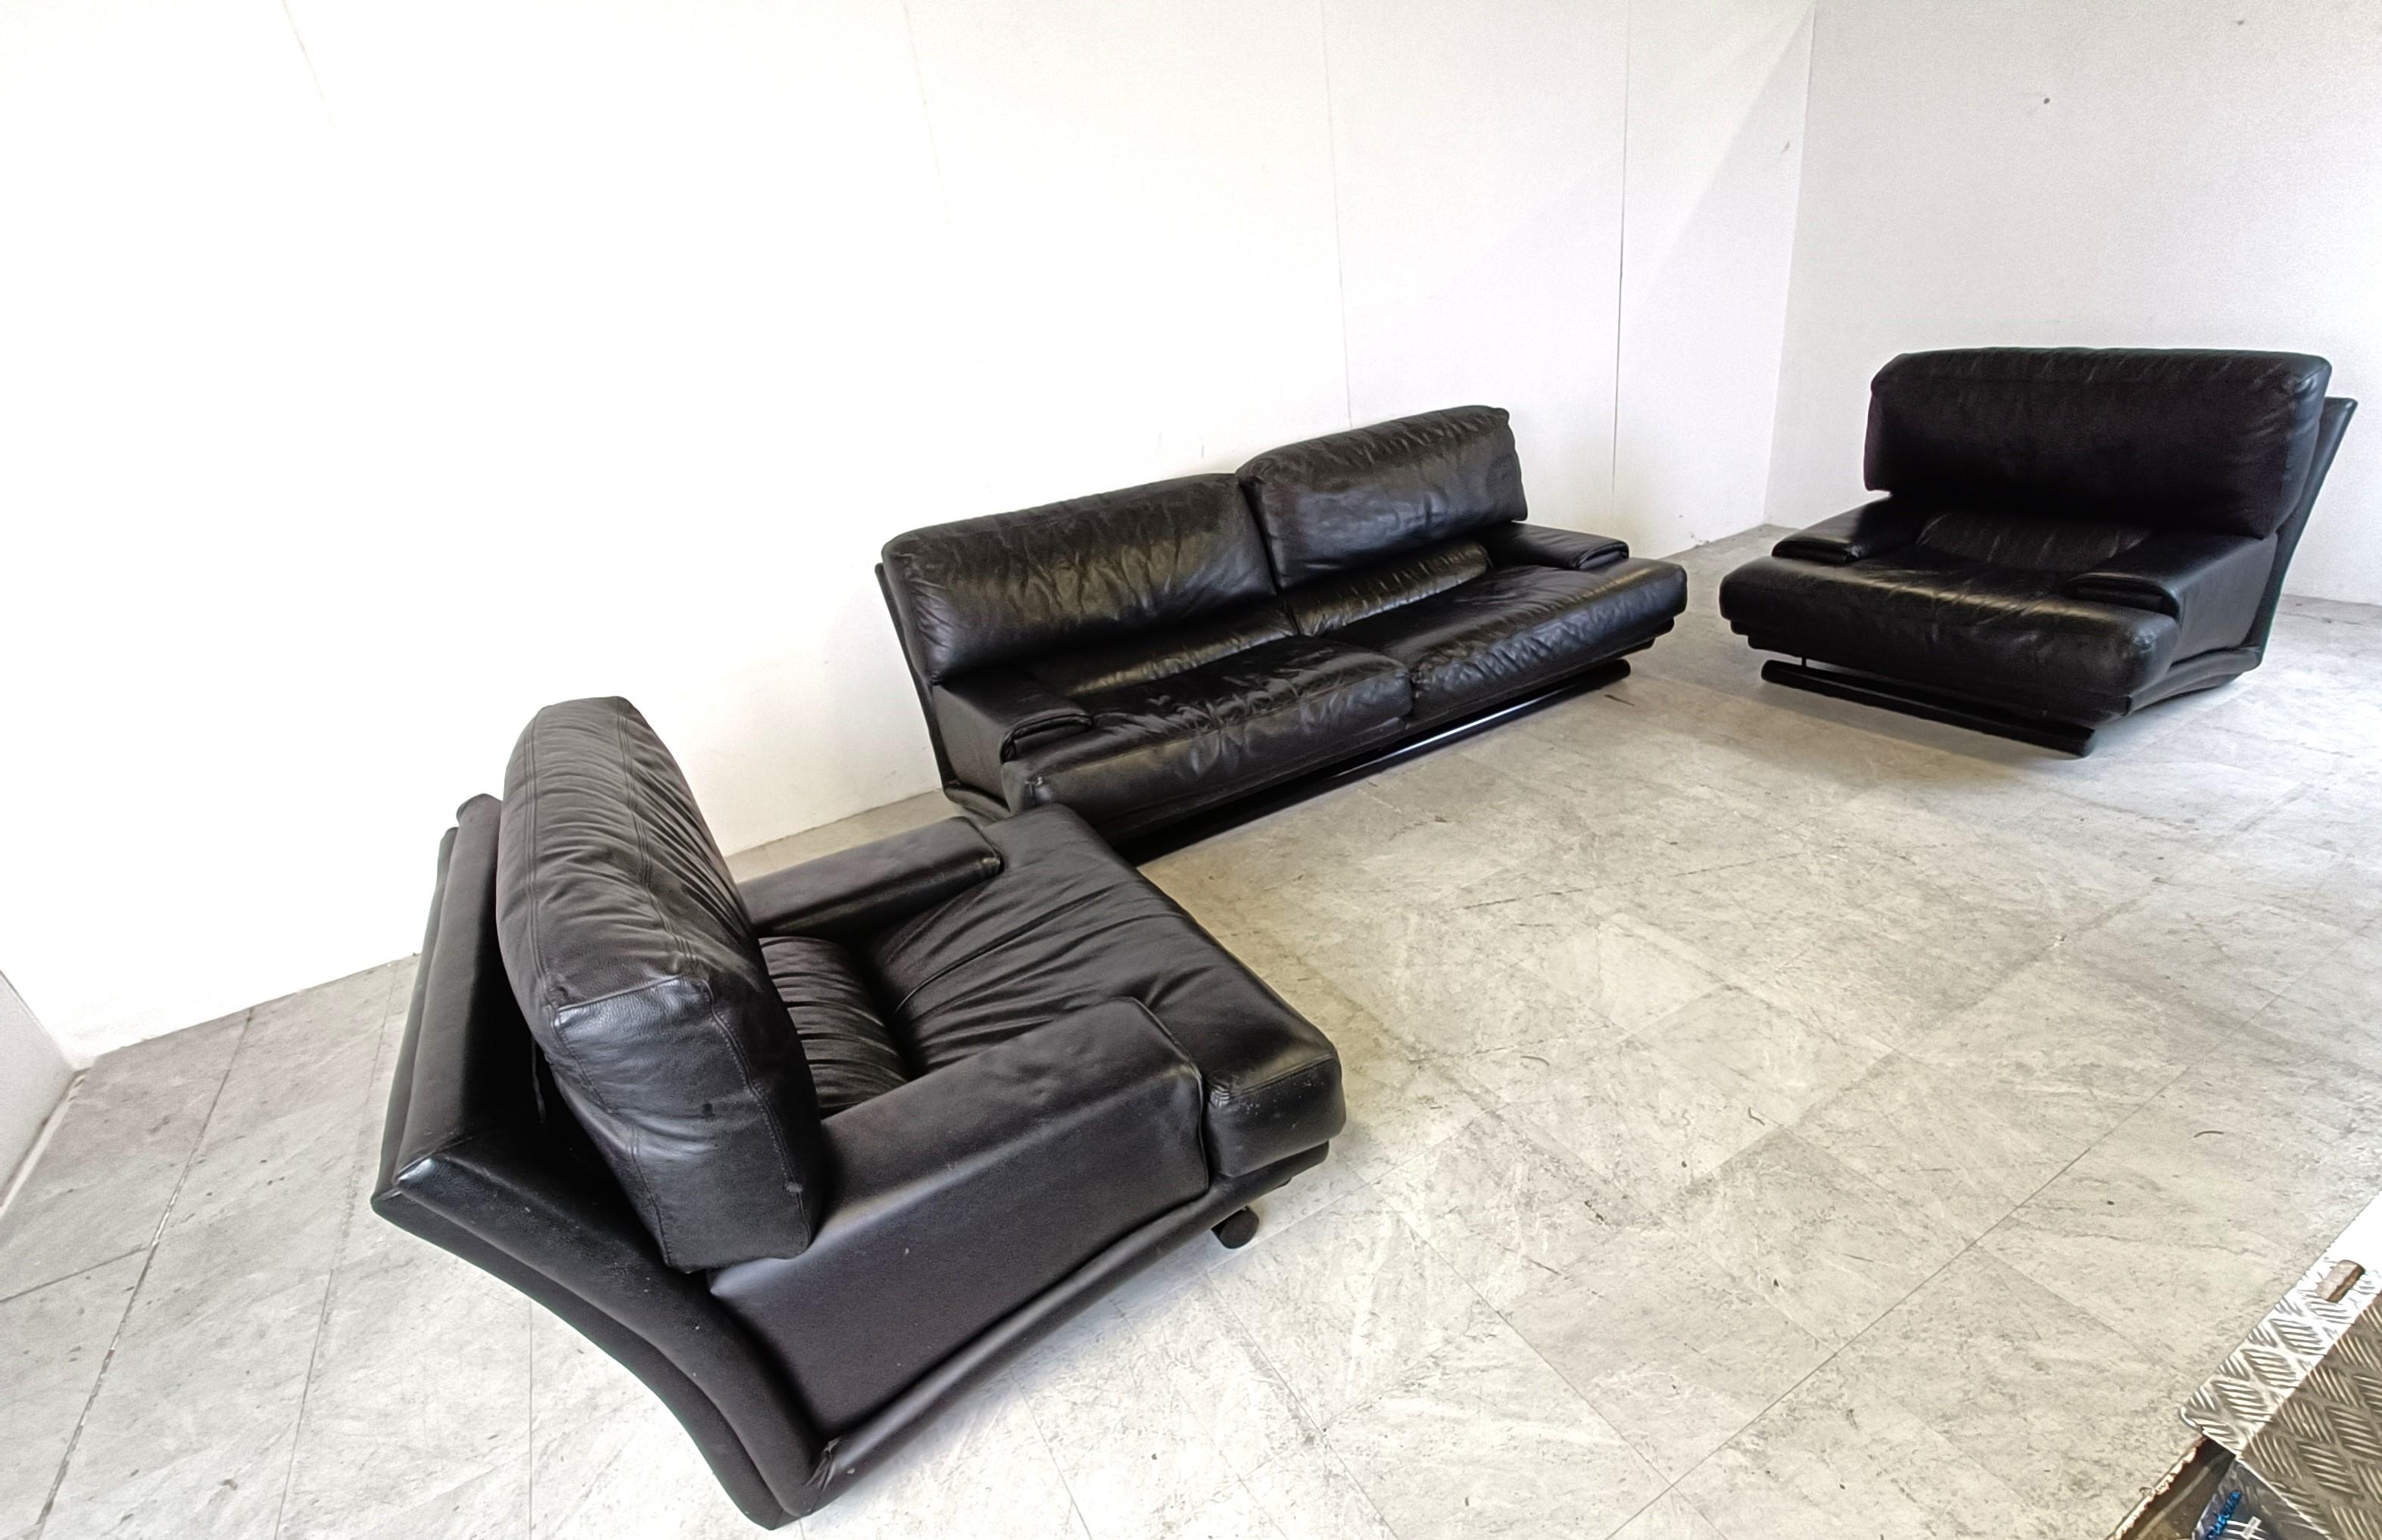 High quality leather design sofa set with thick black leather cushions.

Attractive curvy design with black tubular metal bases at the front.

Very comfortable sofas in good condition.

1970s - Switzerland

Good condition, very sturdy, no rips or